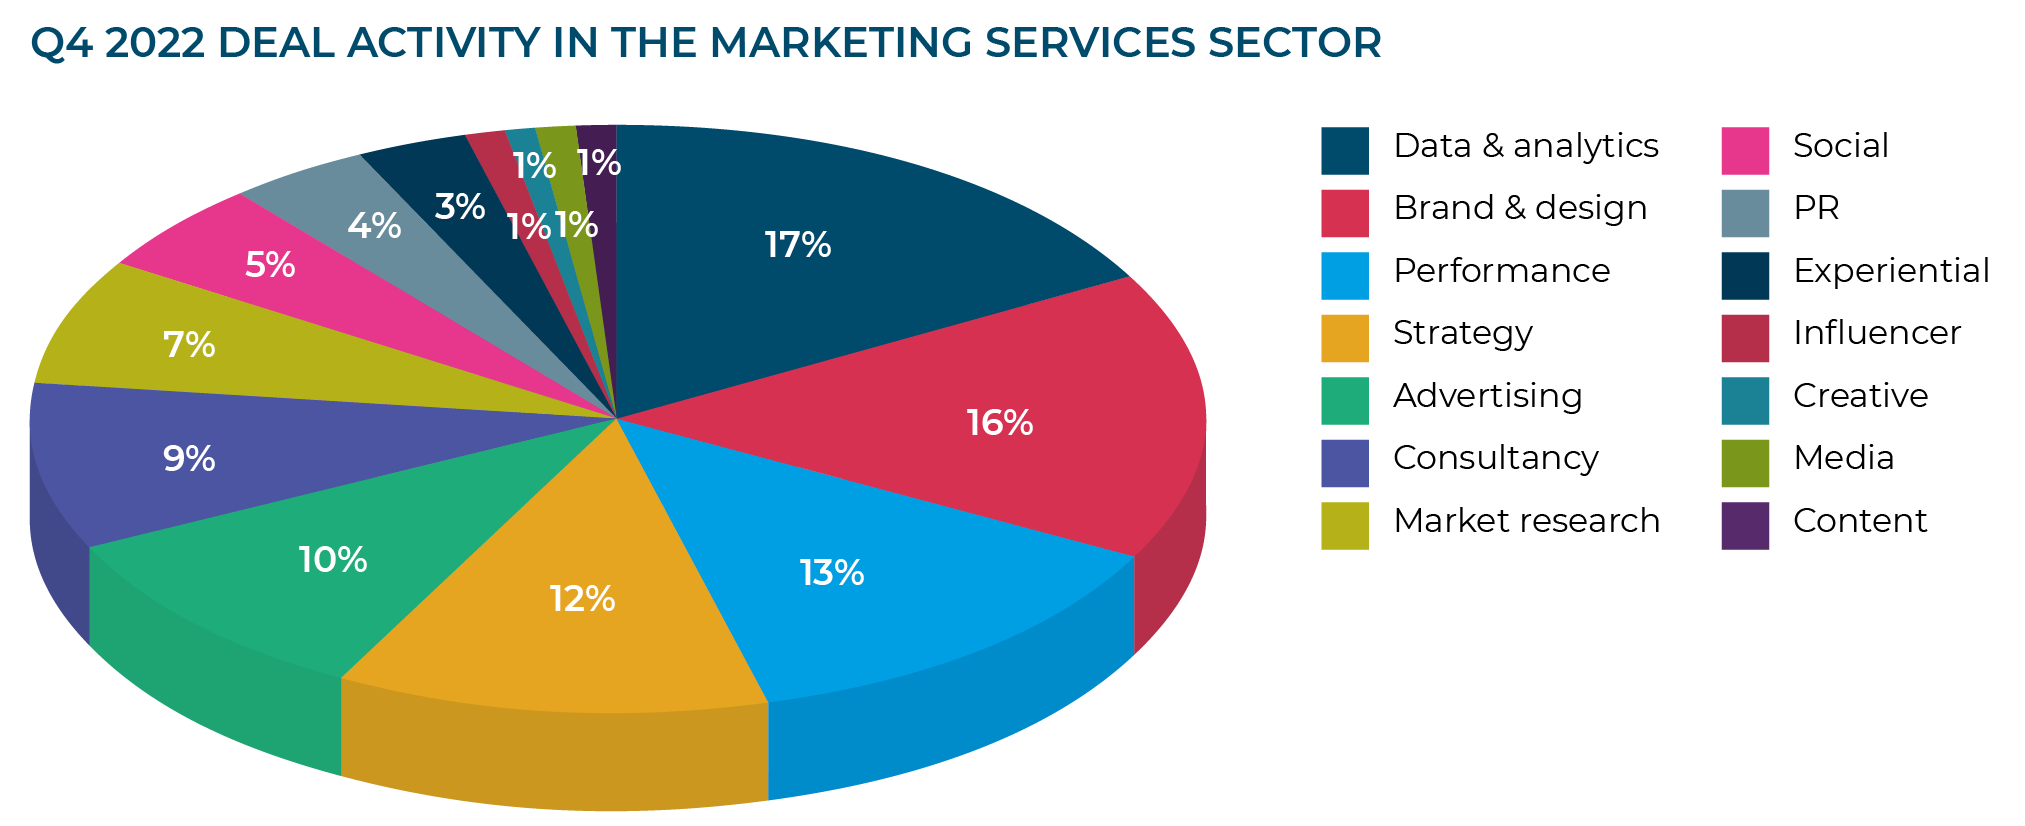 Q4 2022 DEAL ACTIVITY IN THE MARKETING SERVICES SECTOR